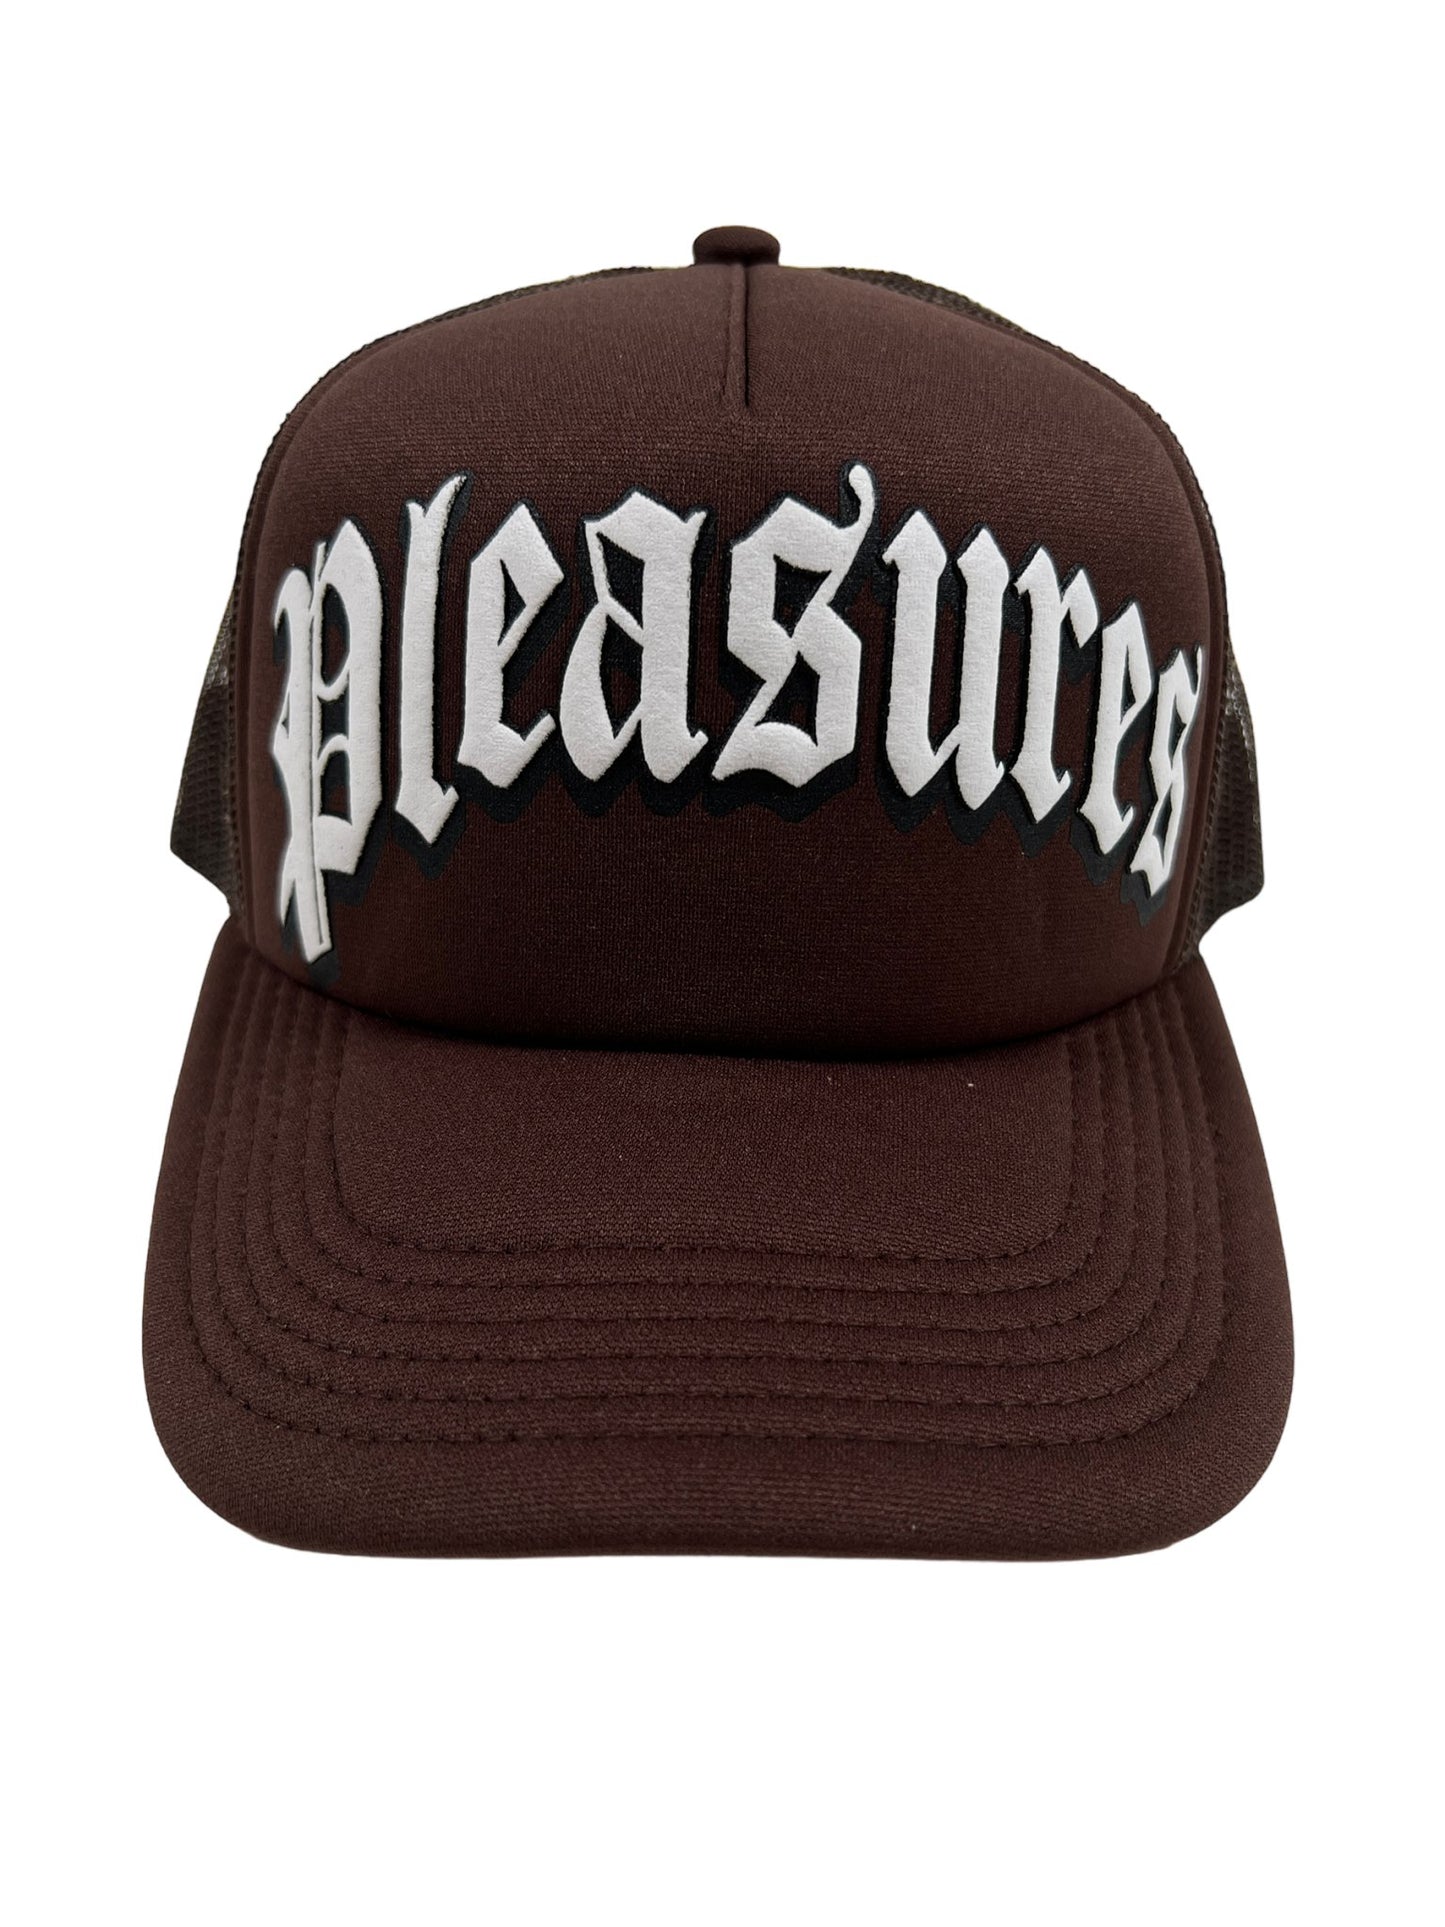 A brown nylon snapback hat with the word PLEASURES on it.